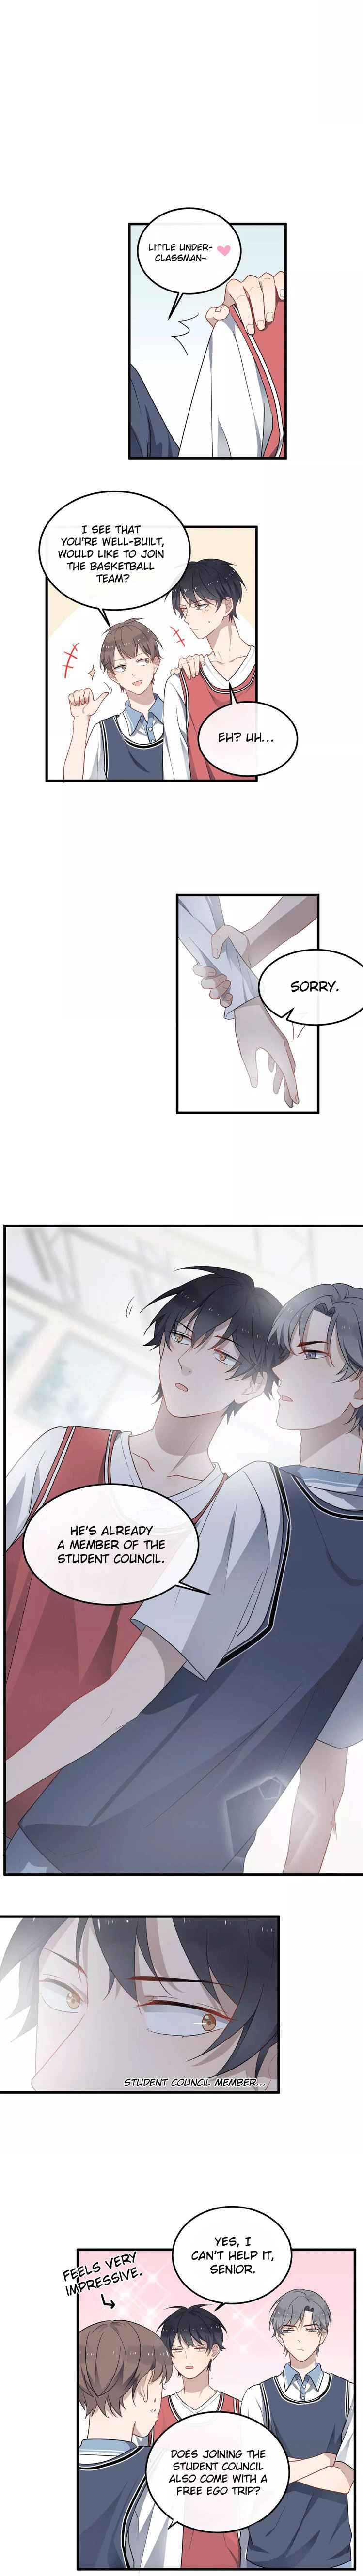 Too Close Ch. 9 He's A Member of the Student Council